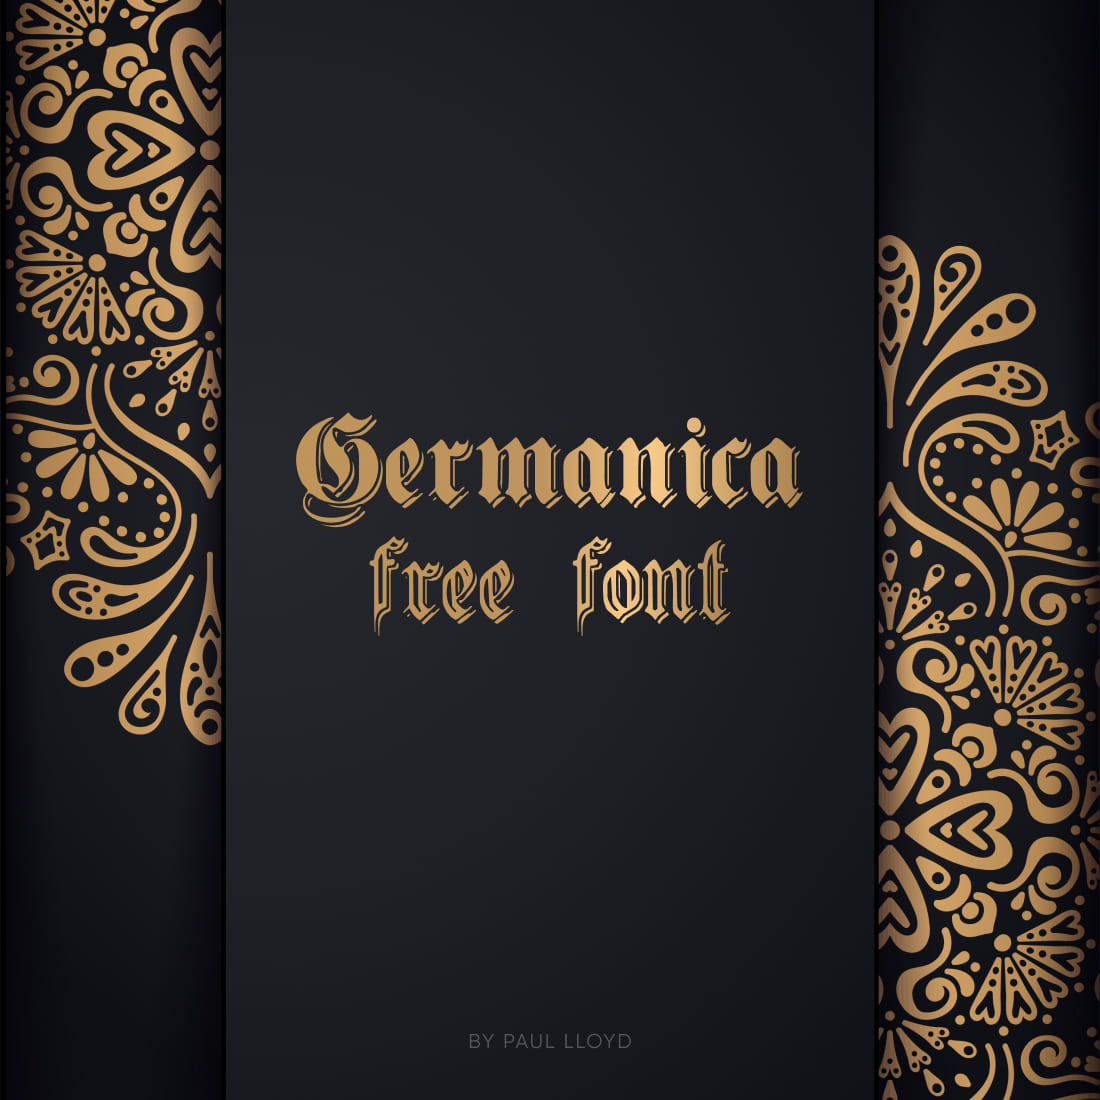 Free Germanic Font Main Cover Collage Image by MasterBundles.